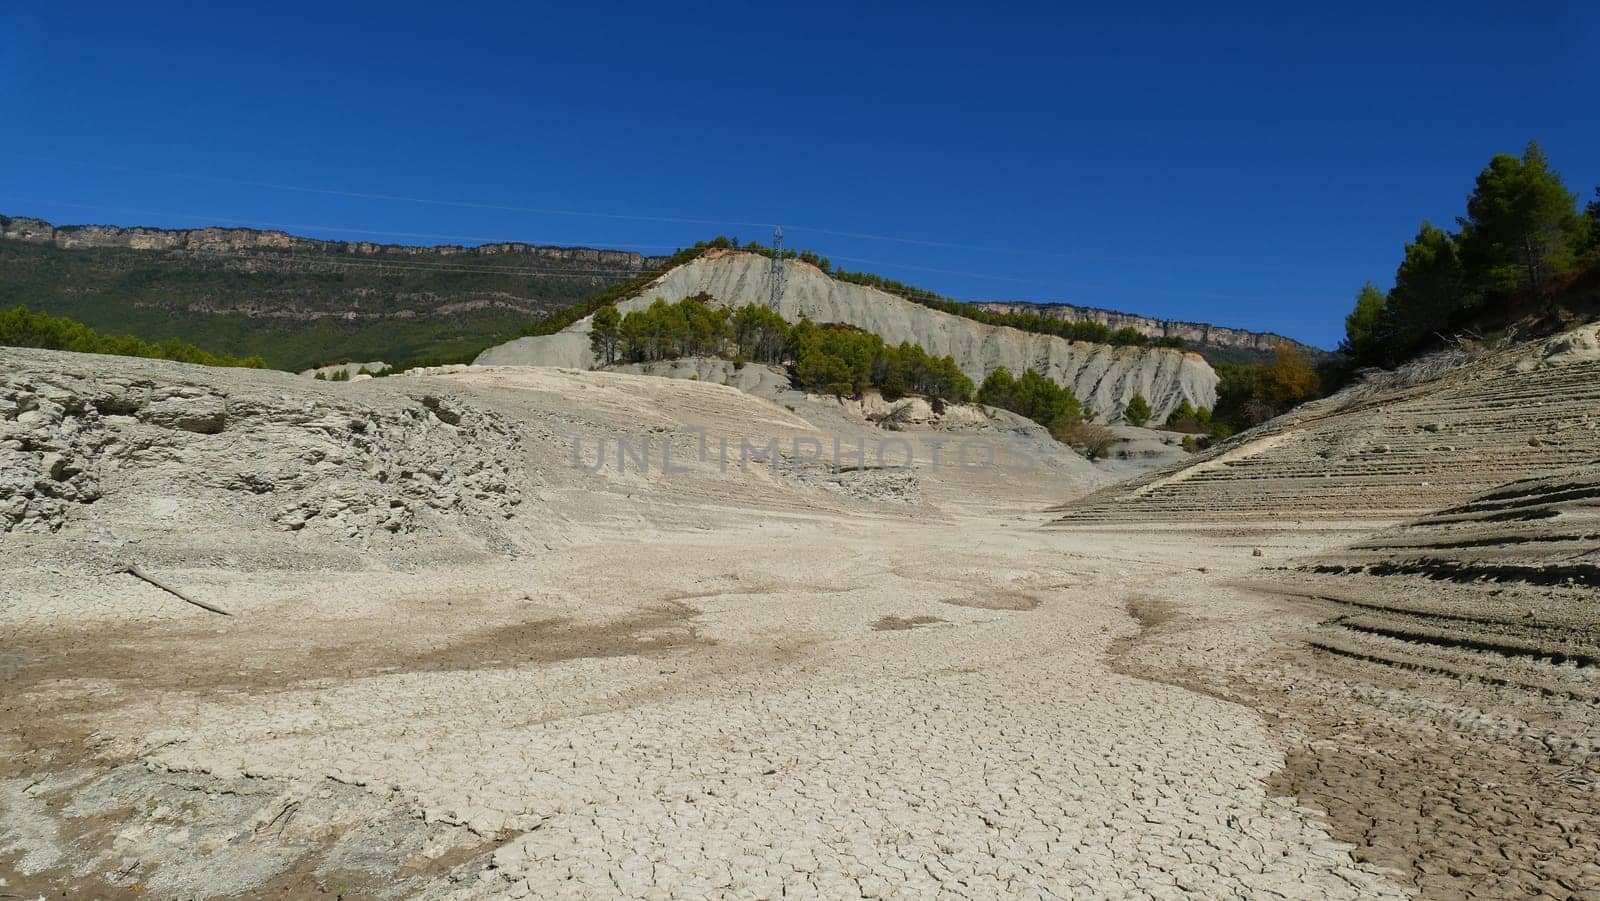 Low water level of the Yesa reservoir in Navarre - October, 2019 by XabiDonostia